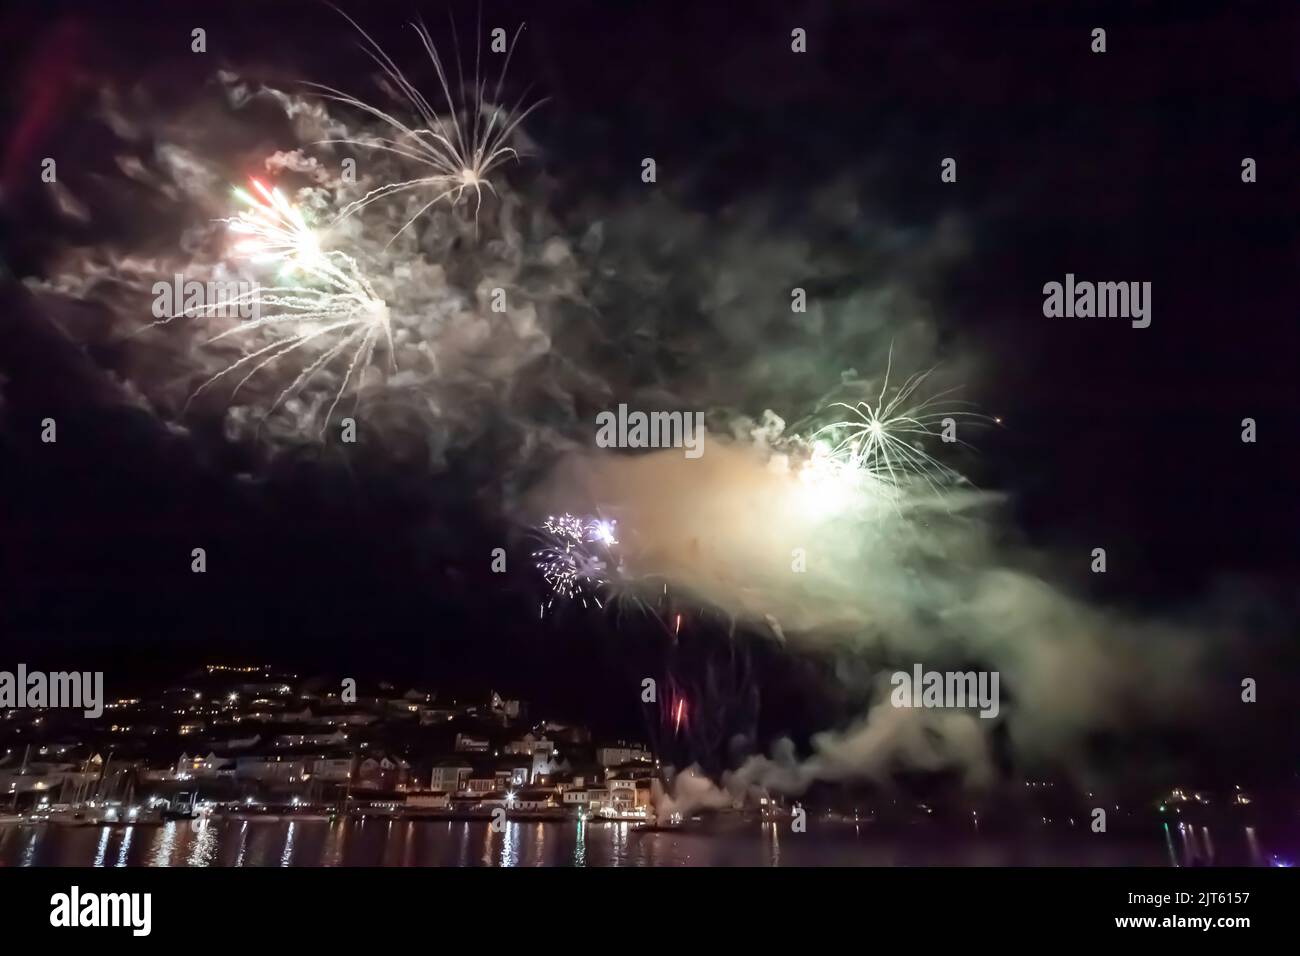 August 27th 2022: Spectacular fireworks at closing of Dartmouth Royal Regatta, on the River Dart between Dartmouth and Kingswear, South Hams, Devon Stock Photo